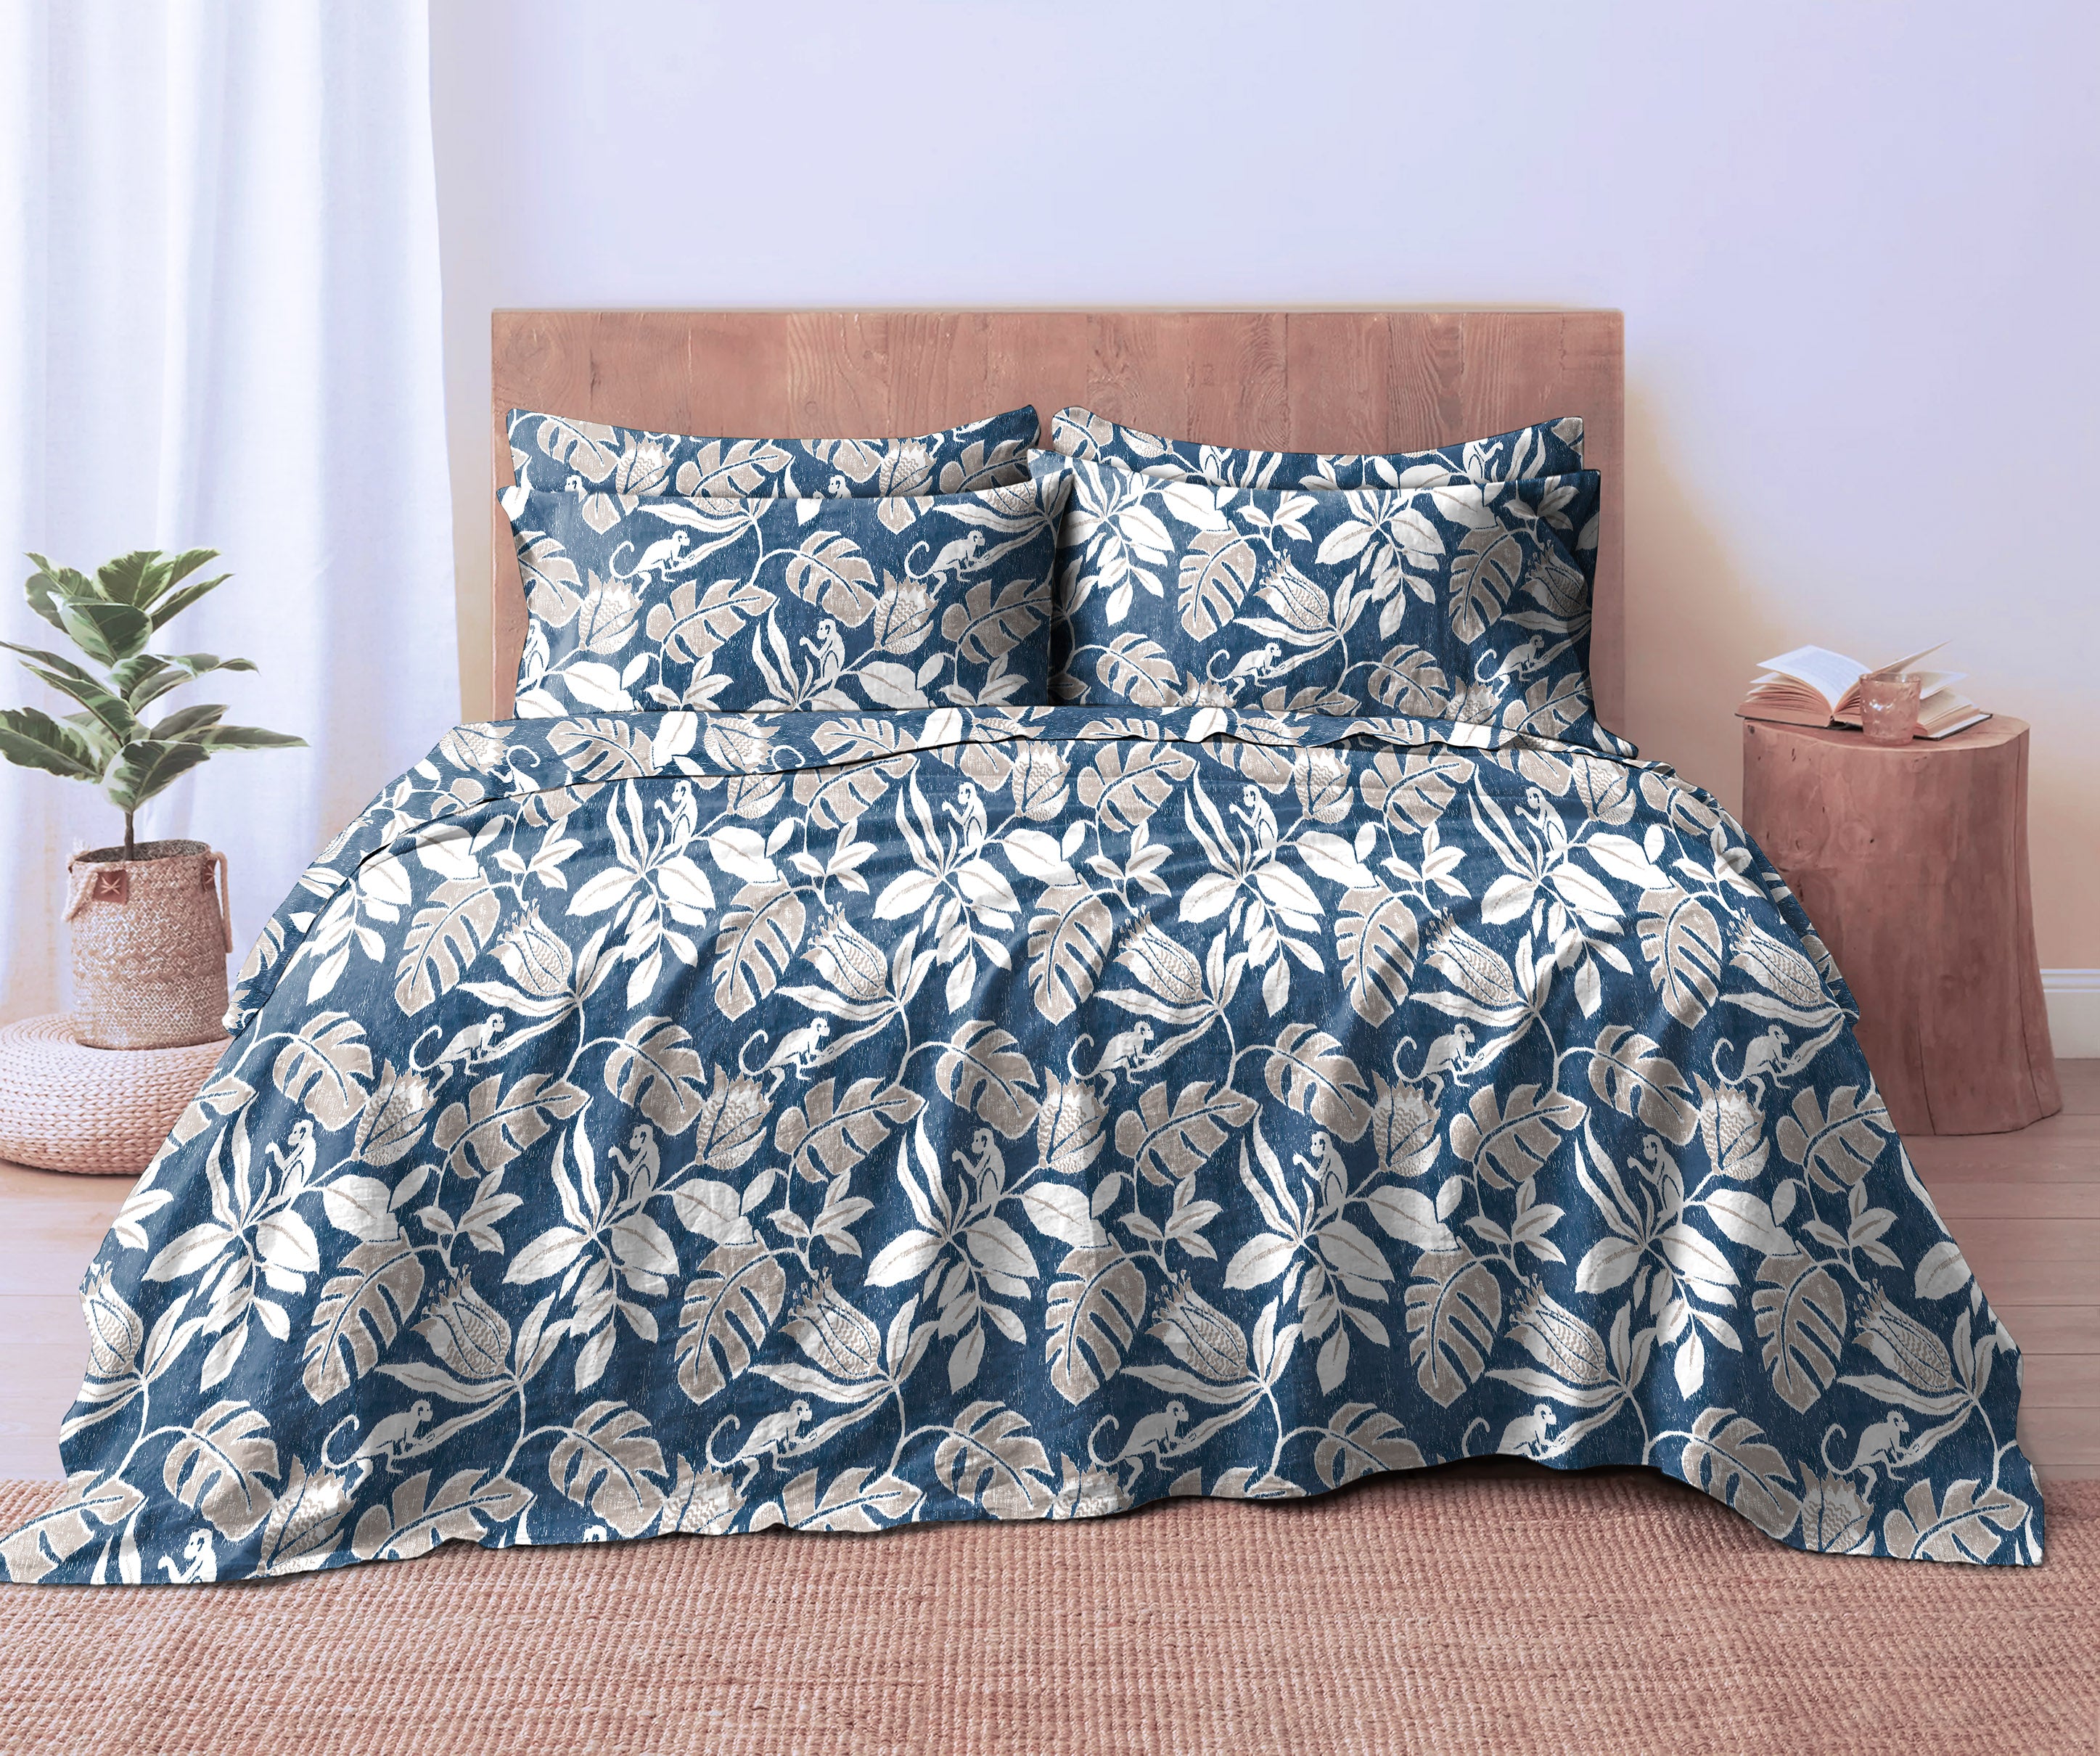 SAVANNA ROYALBLUE BEDCOVER FOR DOUBLE BED WITH 2 PILLOWCOVERS KING SIZE (104" X 90")